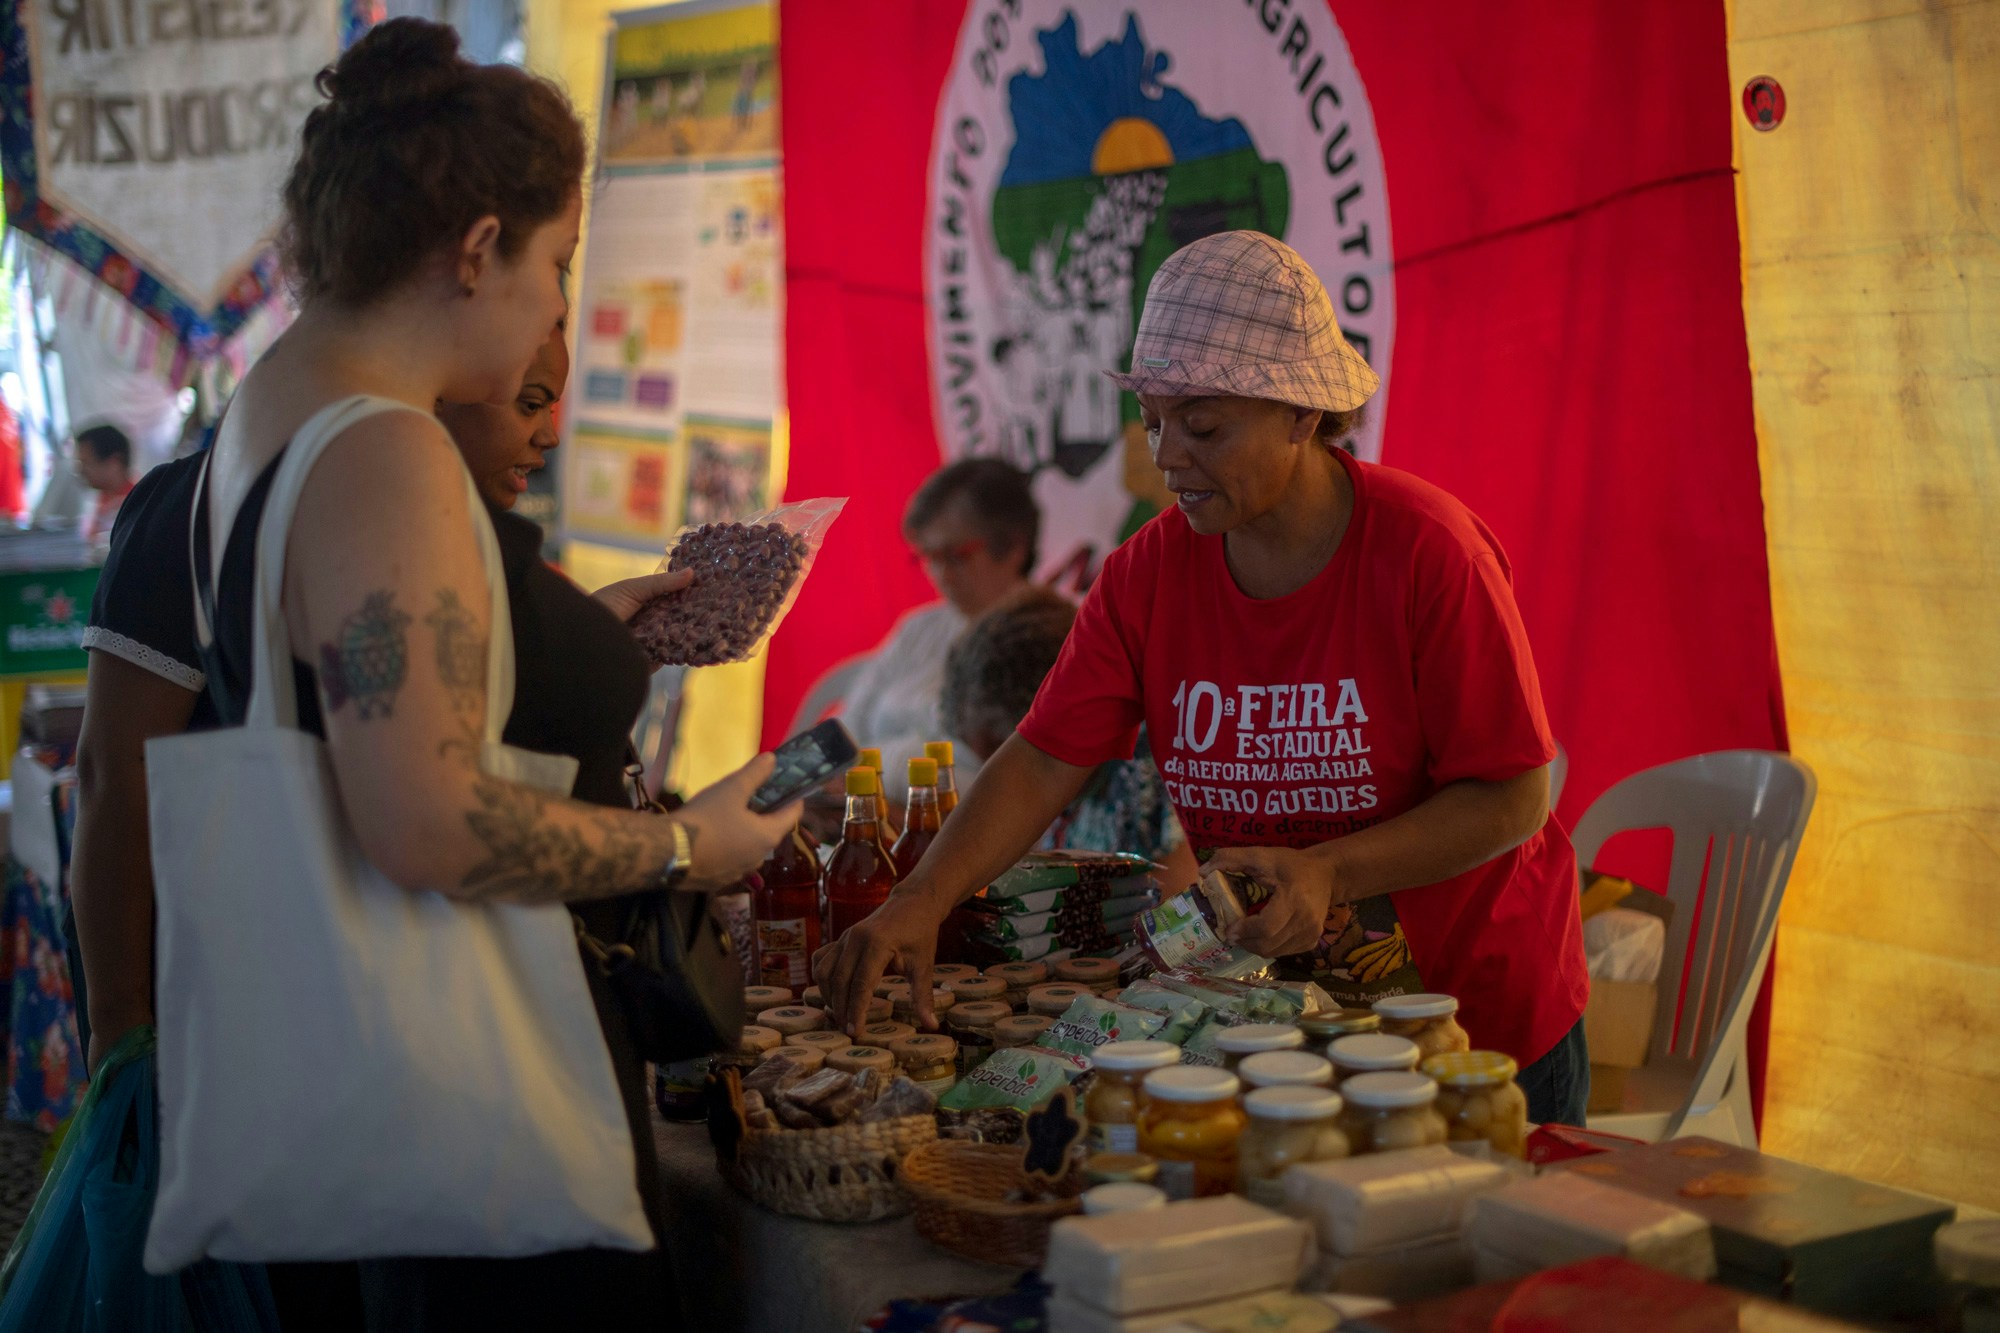 A member of the Landless Workers Movement (MST) sells products, made by MST members in the lands where they are settled, during the annual MST Fair at Carioca Square in downtown Rio de Janeiro, Brazil on December 12, 2018. - The Landless Workers Movement (MST), was born in 1984 and became one of the most important social organizations in Latin America, which since its origins has been claming for arable land for small farmers, defending an environmentally friendly agriculture, the opposite concept to the current model. The inauguration of Bolsonaro's far-right new government in January augurs even harder times for the Movement. (Photo by Mauro Pimentel / AFP)        (Photo credit should read MAURO PIMENTEL/AFP via Getty Images)